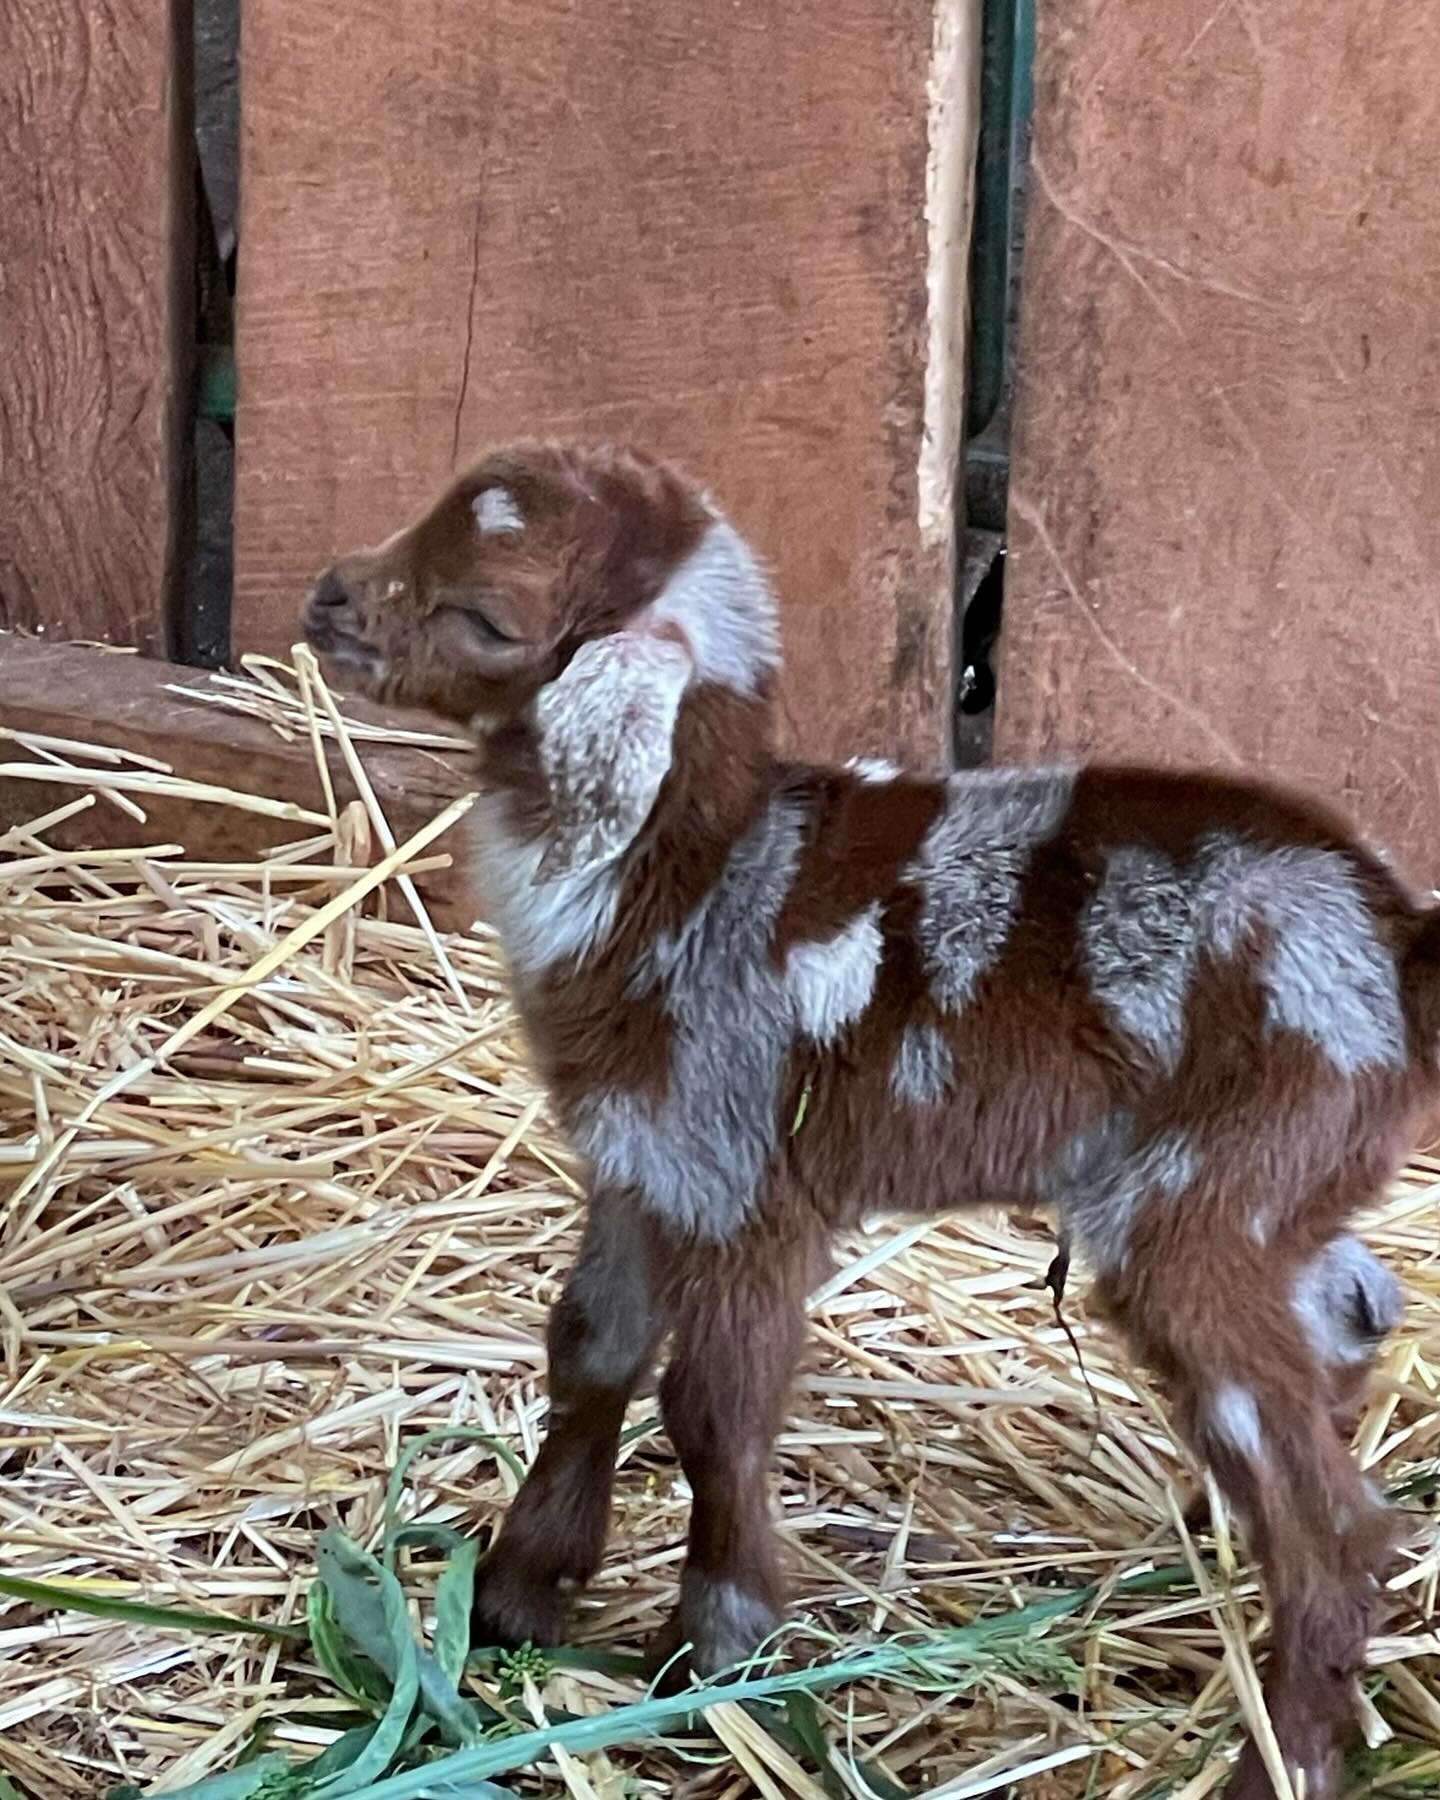 Another new baby! Picasso the painted goat! Isn’t he beautiful 🤩 #goat #babygoat #babyanimals #kid #baby